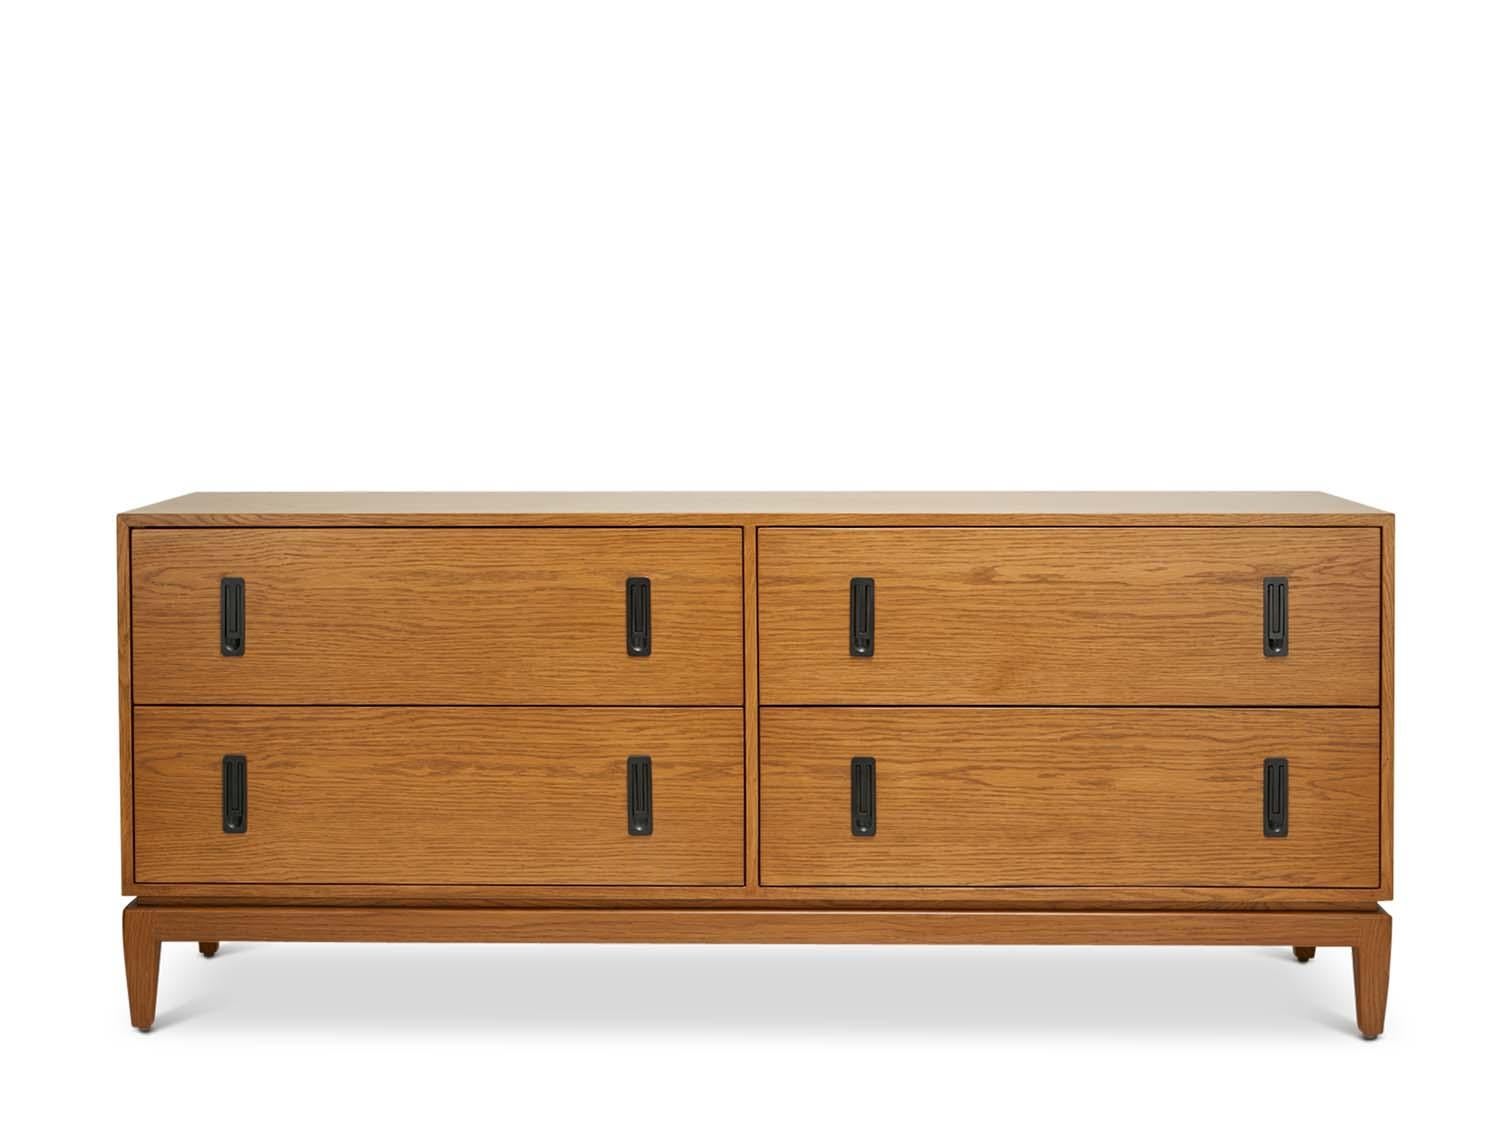 The 4-drawer Arcadia chest features four drawers, cast brass hardware, and a sculptural solid American walnut or white oak base. 

The Lawson-Fenning Collection is designed and handmade in Los Angeles, California. Reach out to discover what